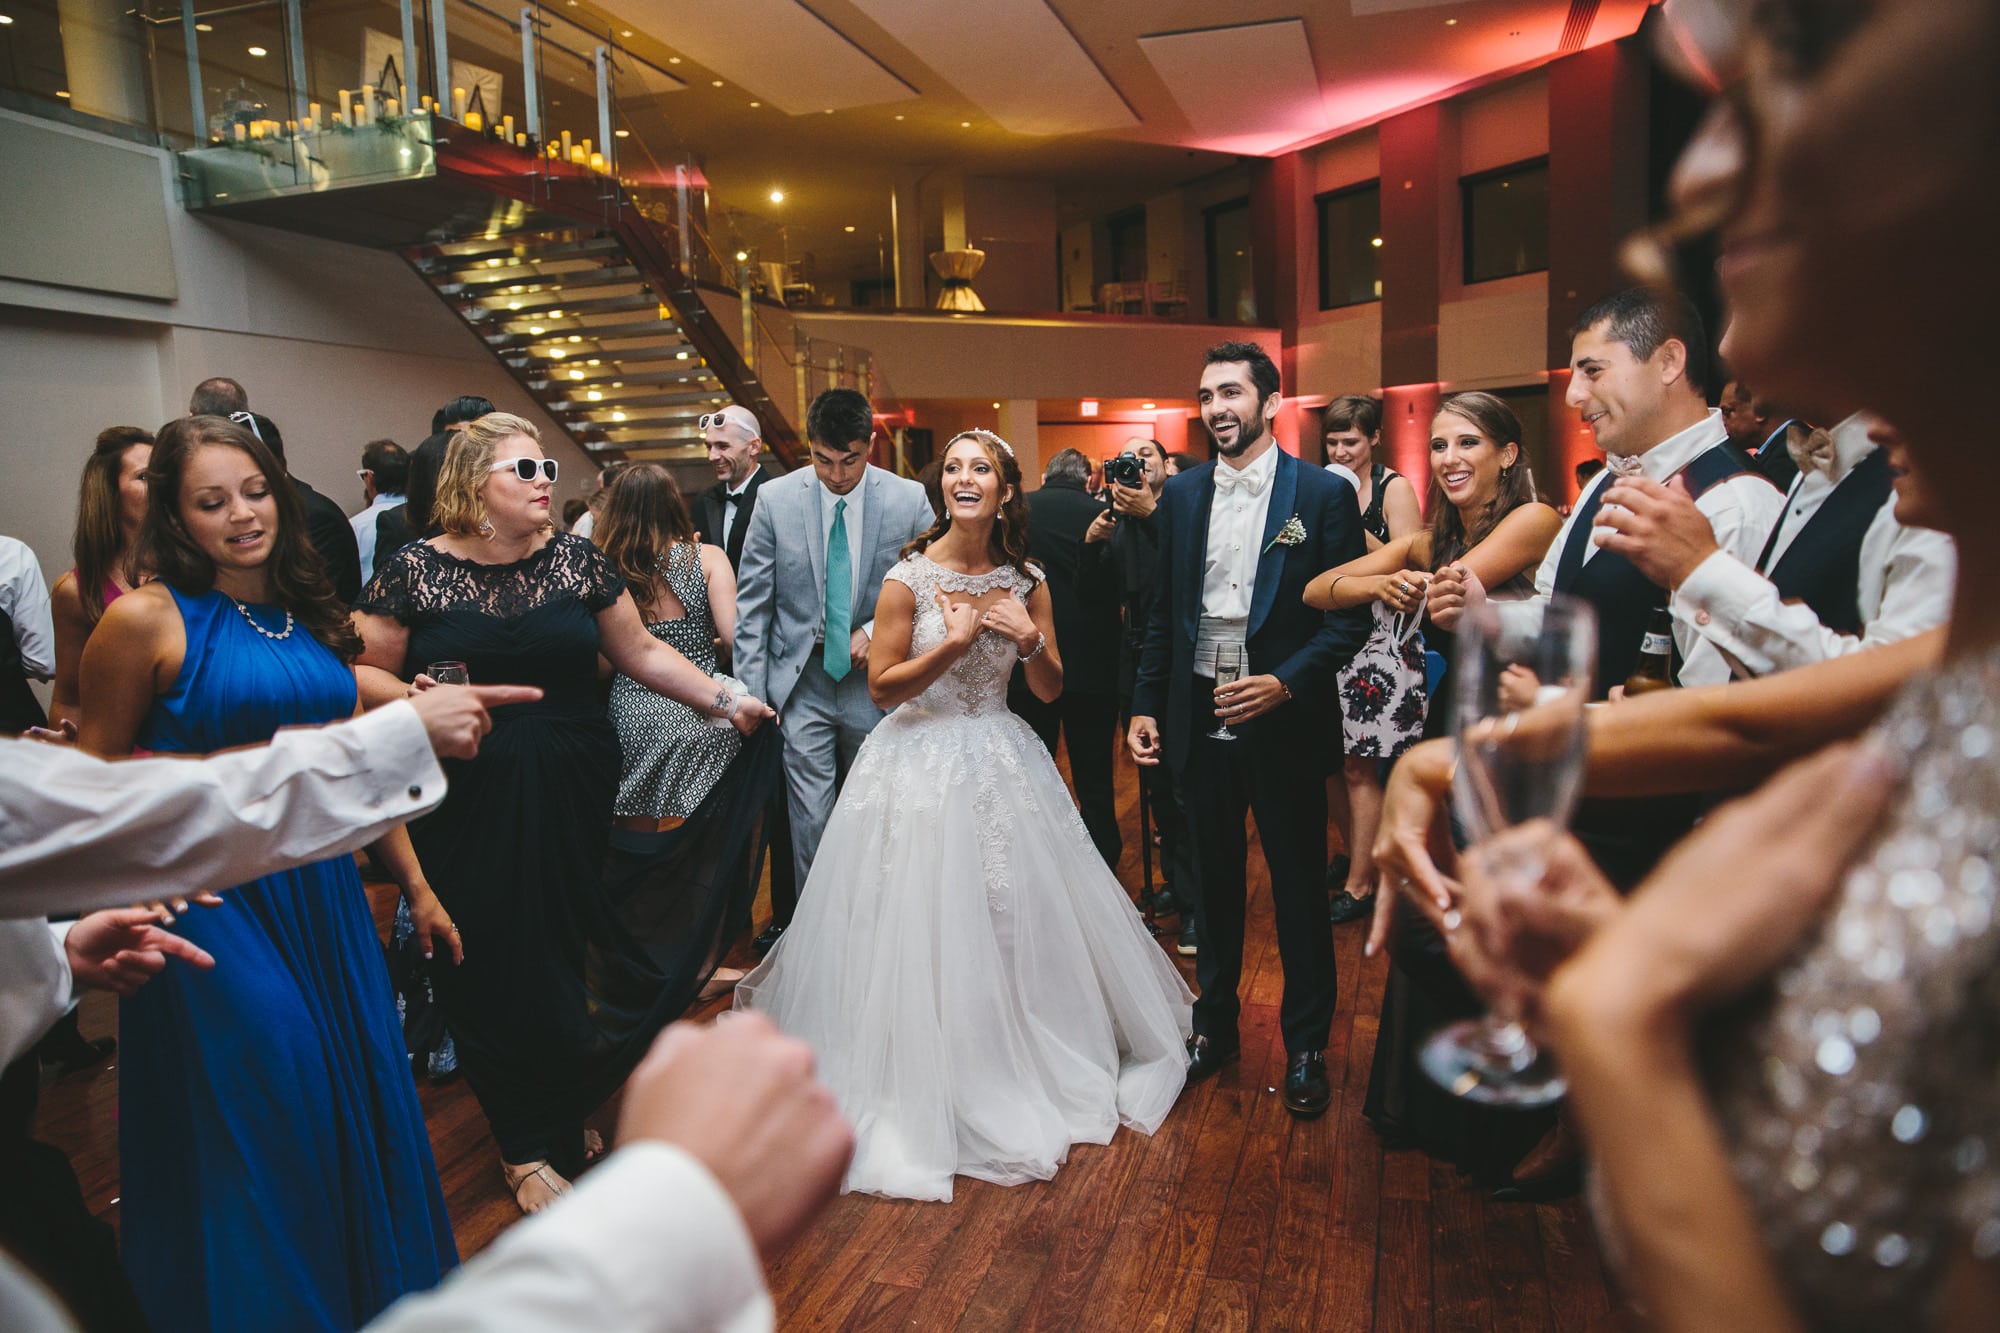 A documentary photograph of guests dancing with the Bride and Groom during a State Room Wedding in Boston, Massachusetts